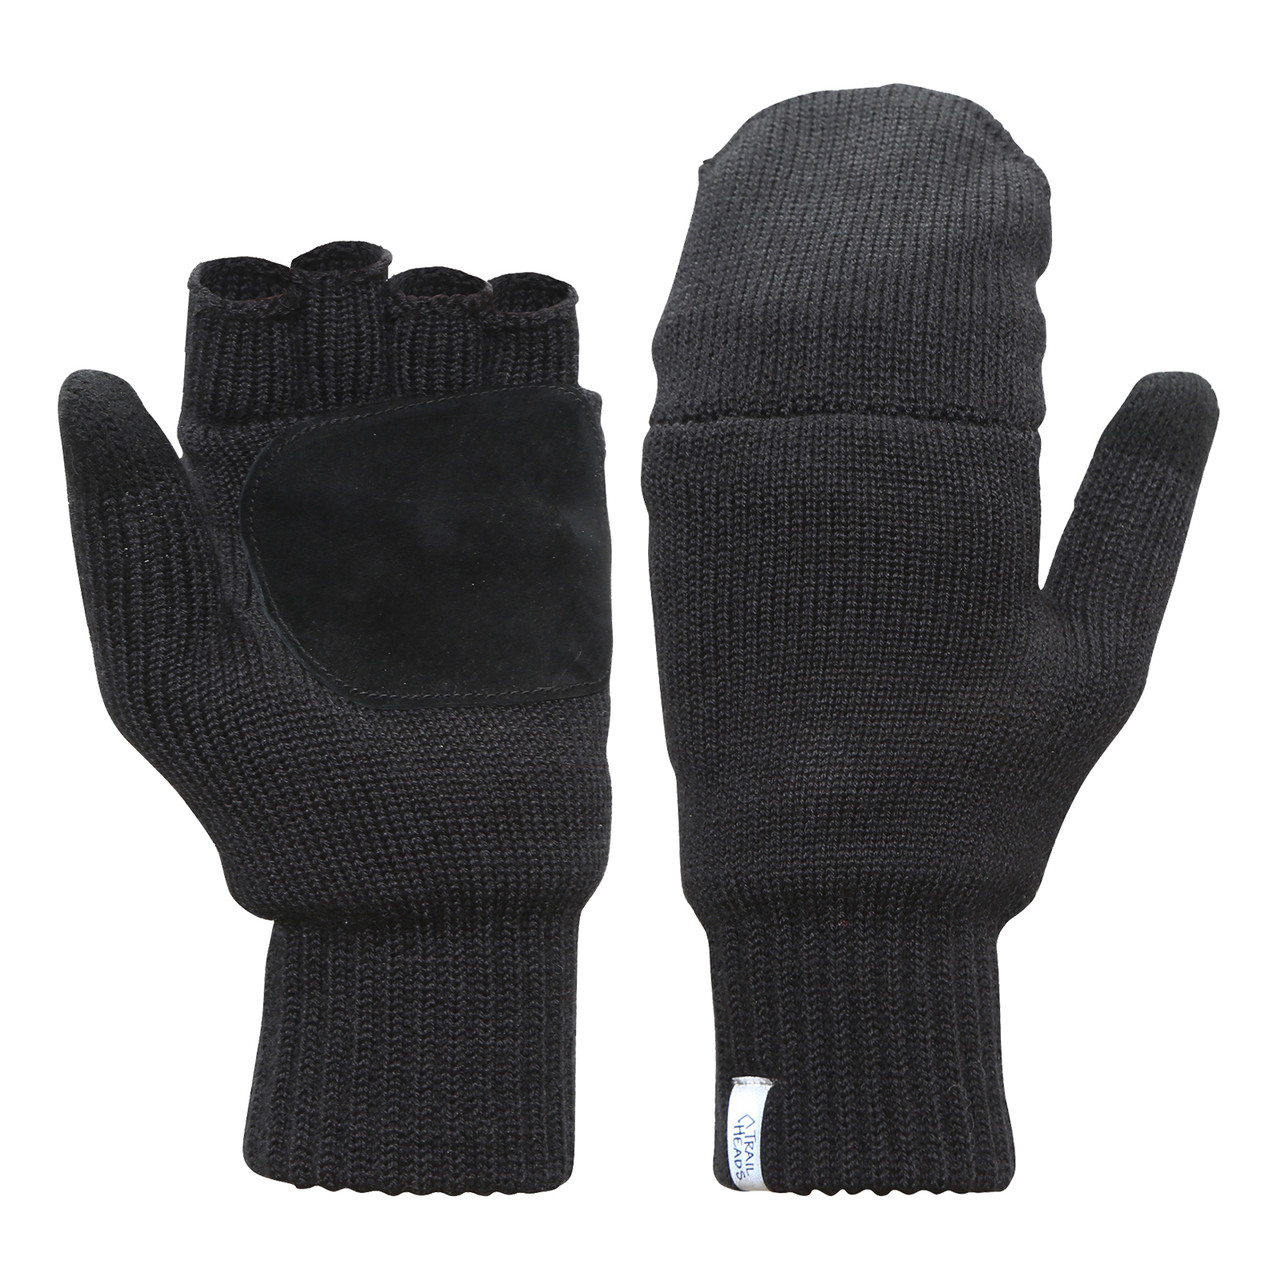 https://cdn11.bigcommerce.com/s-558hrkjw/images/stencil/1280x1280/products/469/6046/S926_dbl_front_and_back_merino_convertible_mitten__96964.1598025953.jpg?c=2